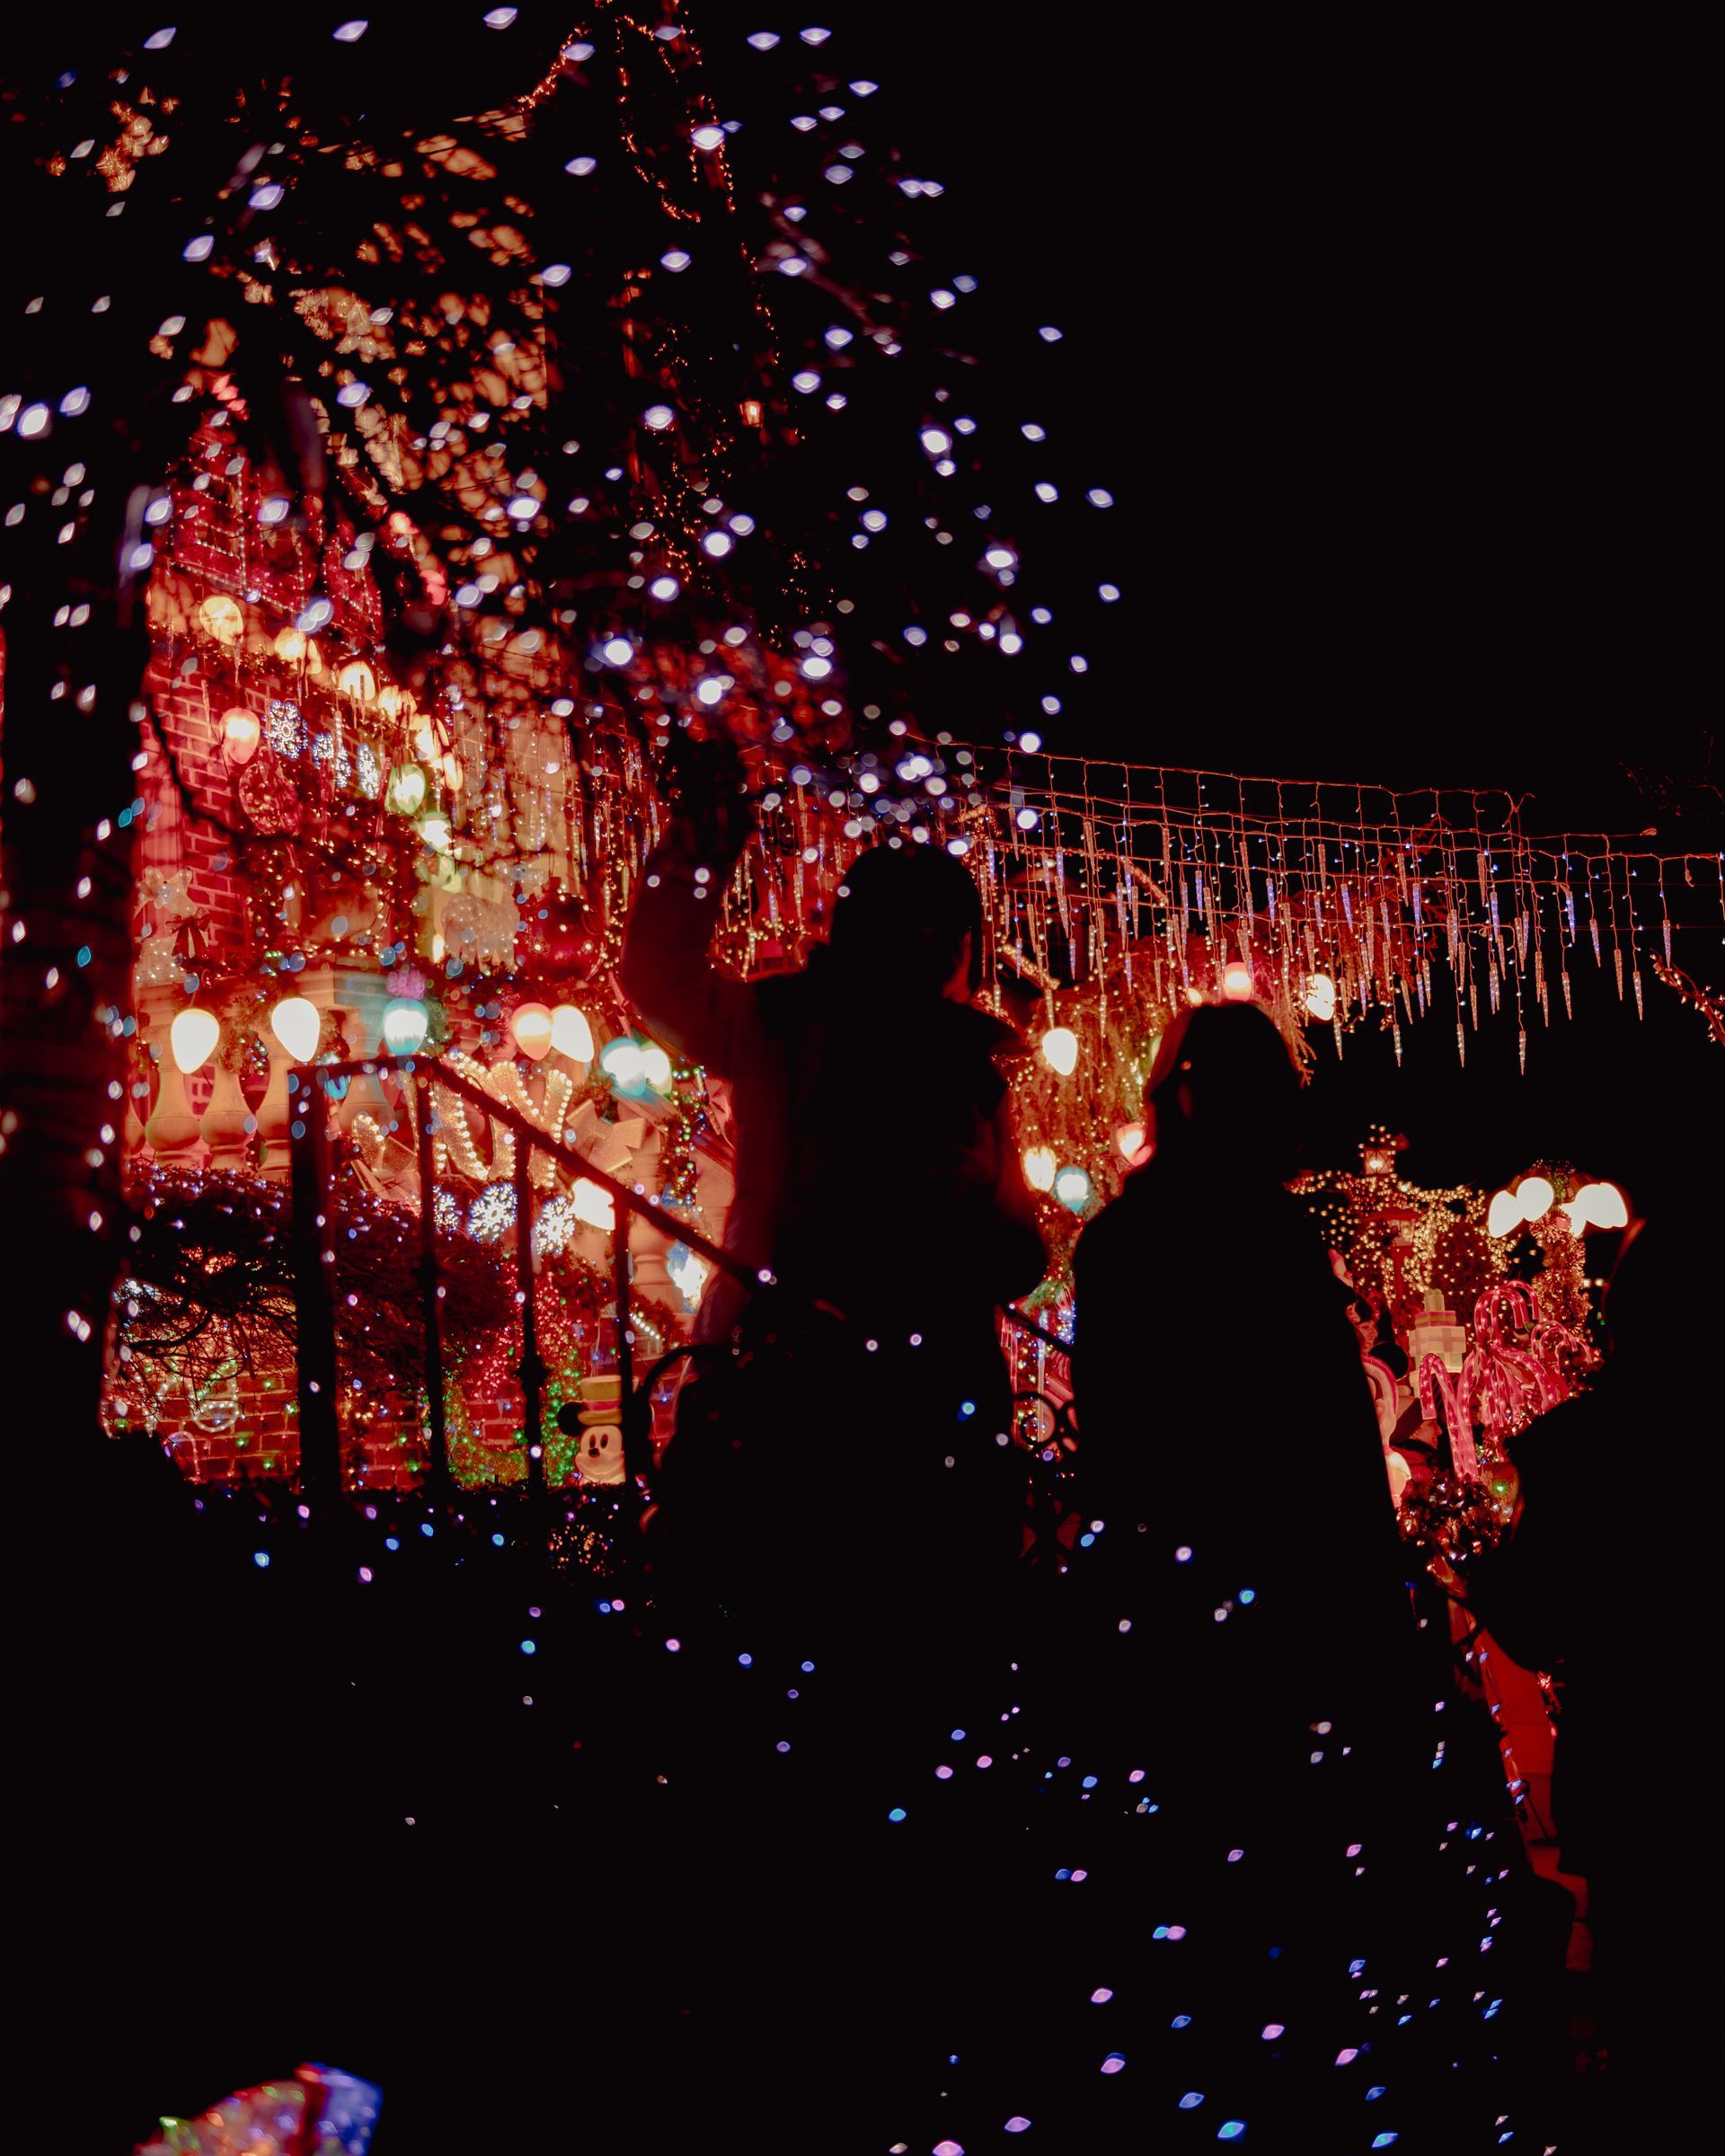 Silhouette of people standing under a string of lights - Fairy lights